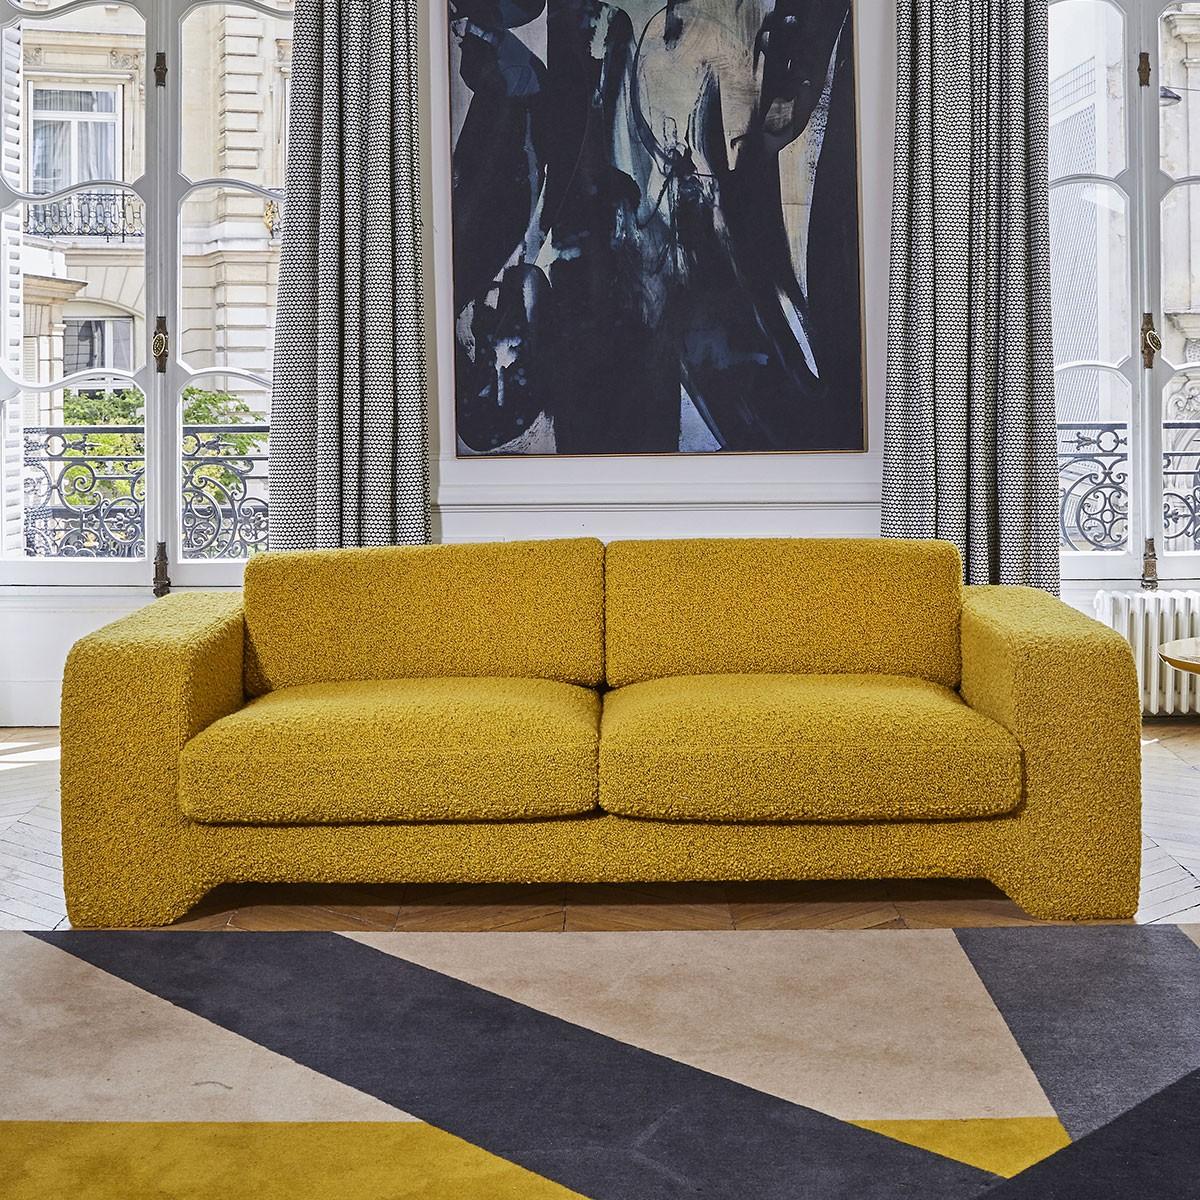 Popus Editions Giovanna 4 seater sofa in Oil Petrol Como Velvet Upholstery

Giovanna is a sofa with a strong profile. A sober, plush line, with this famous detail that changes everything, so as not to forget its strength of character and this